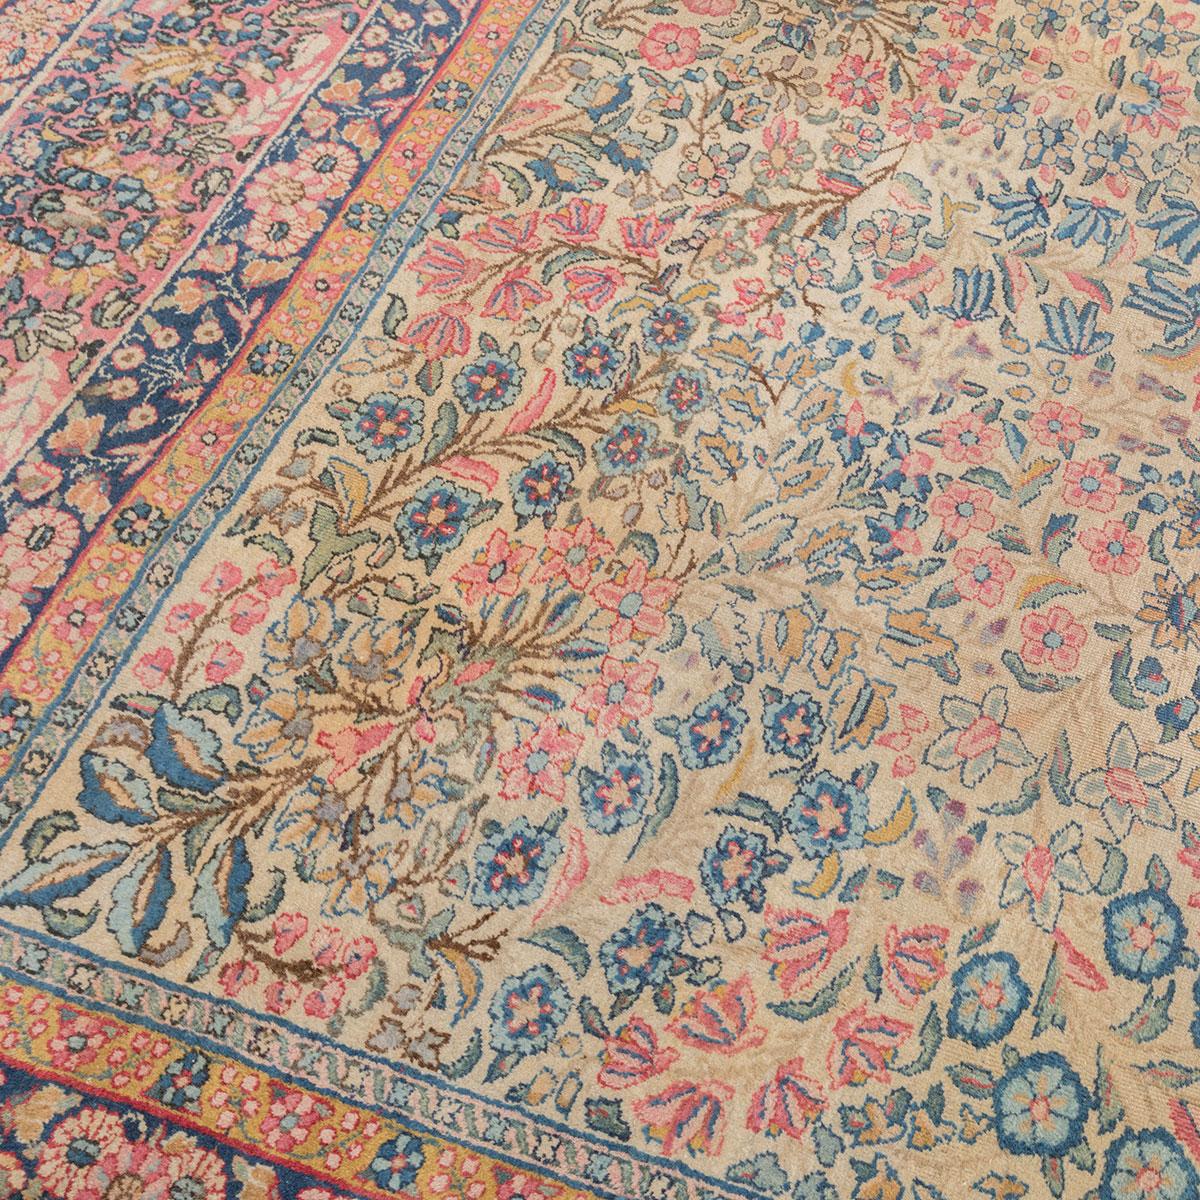 Antique rug. Classic design of the city of Kirman elaborated for the European market of the time. 
- Handmade wool Rug.
- Rug has measures: 3.65 x 2.70 m.
- A succession of flowers in different ranges make up the central field.
- Blues, pinks and